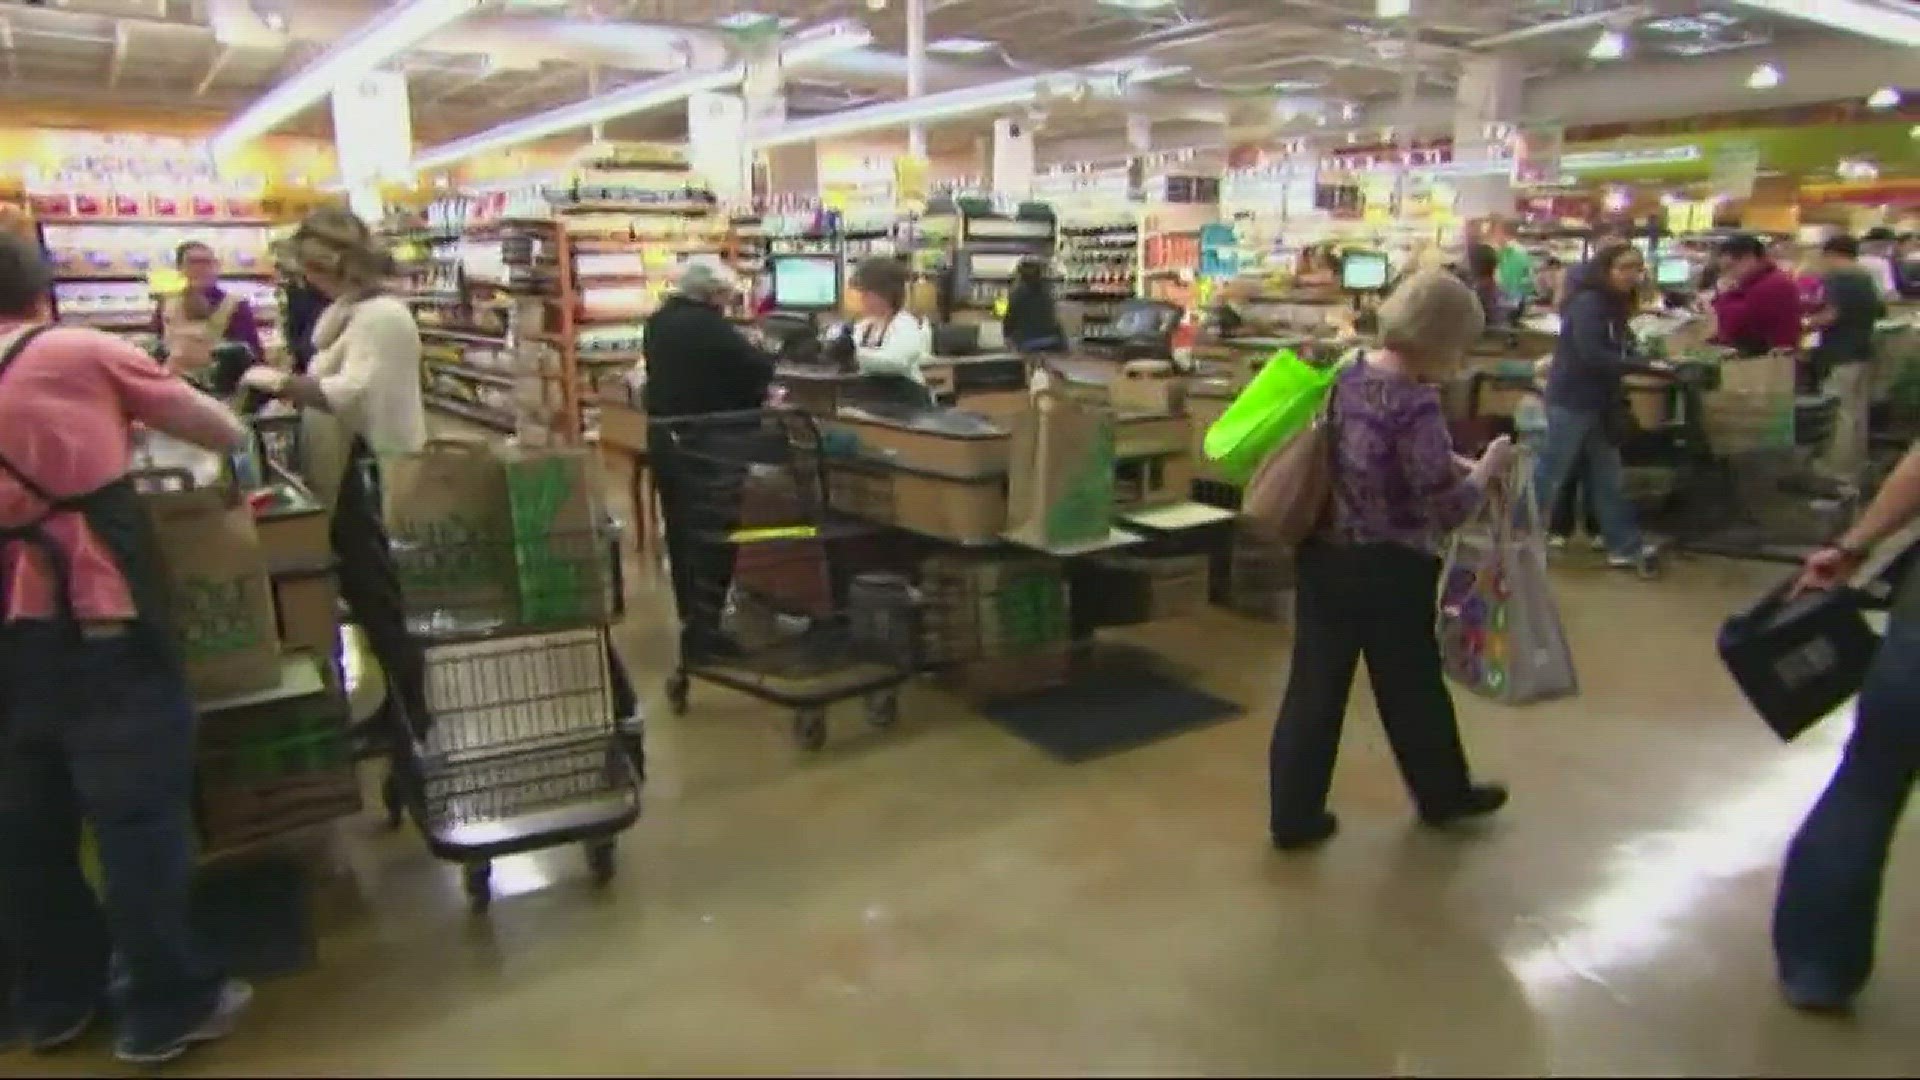 Whole Foods followed through with their promise to drop prices. Will the move make them more competitive and are the price drops worth it? We sent Consumer Investigator Bill McGinty shopping to find out.